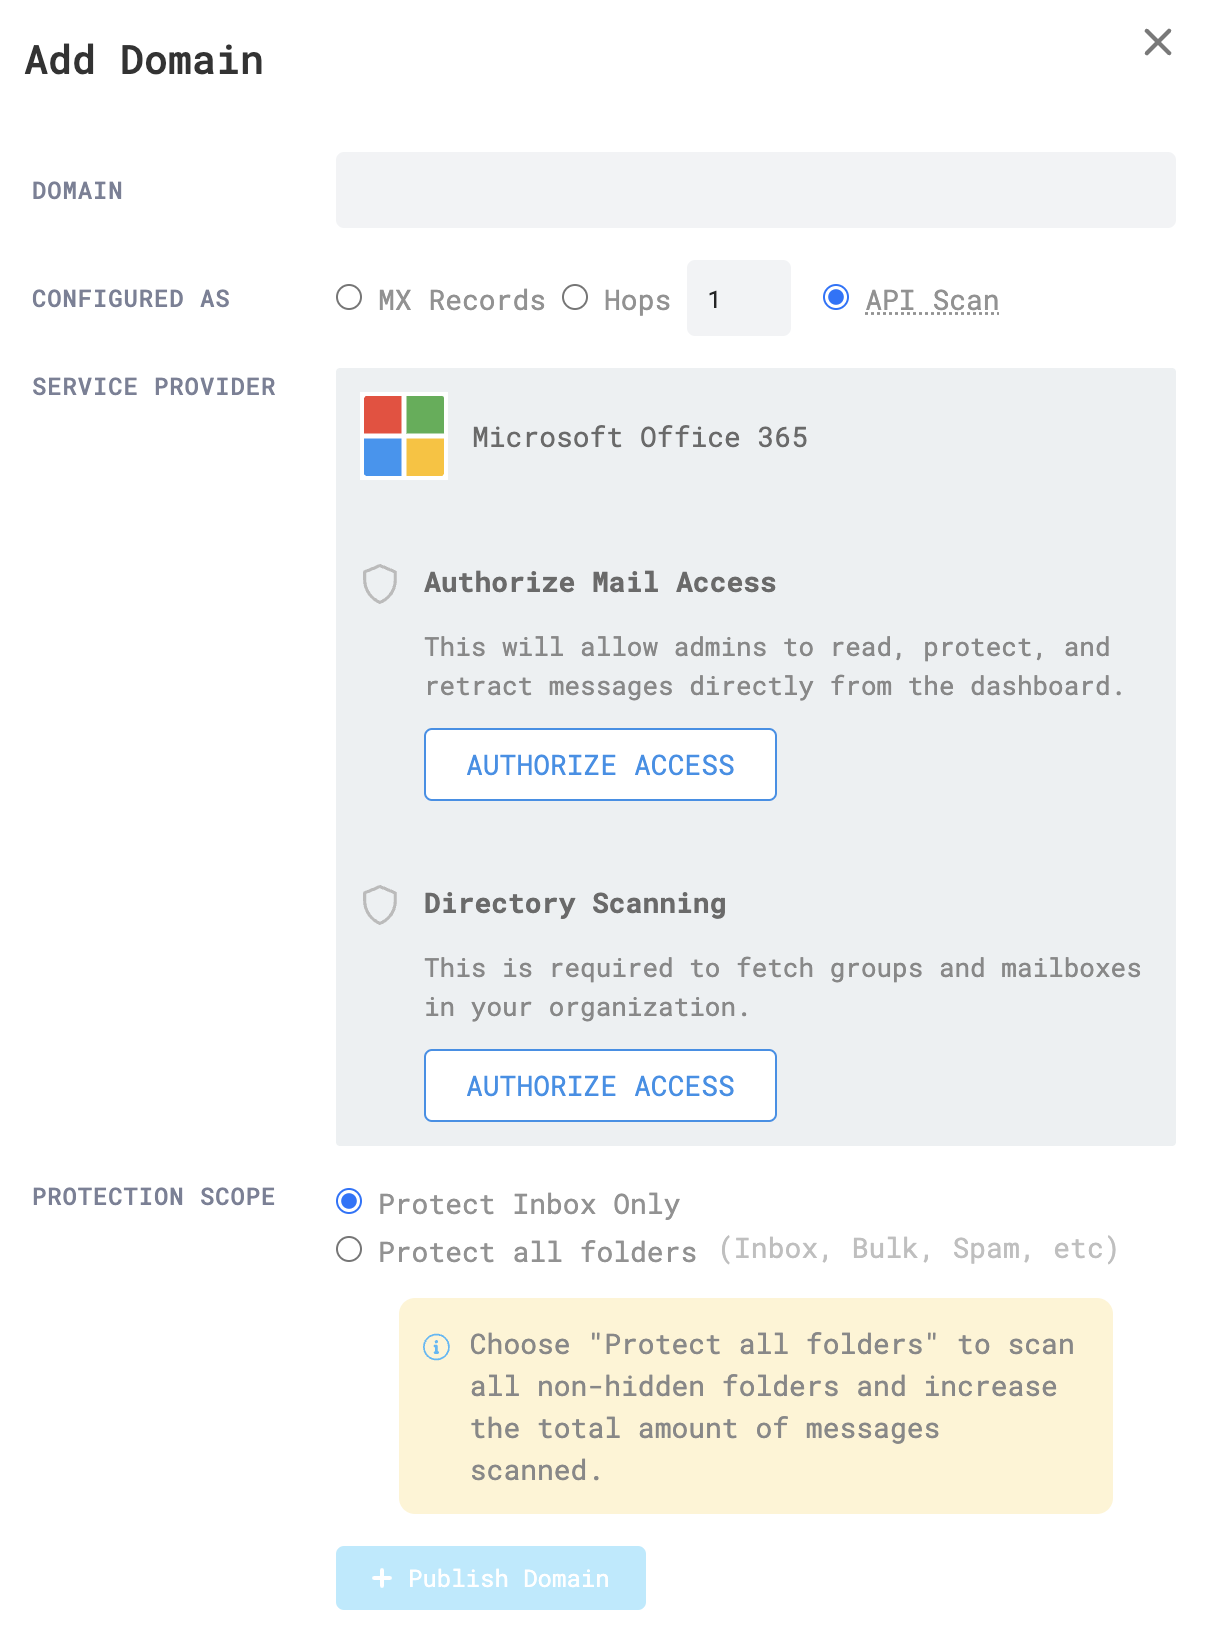 Select Authorize access to give the correct permissions do Cloud Email Security